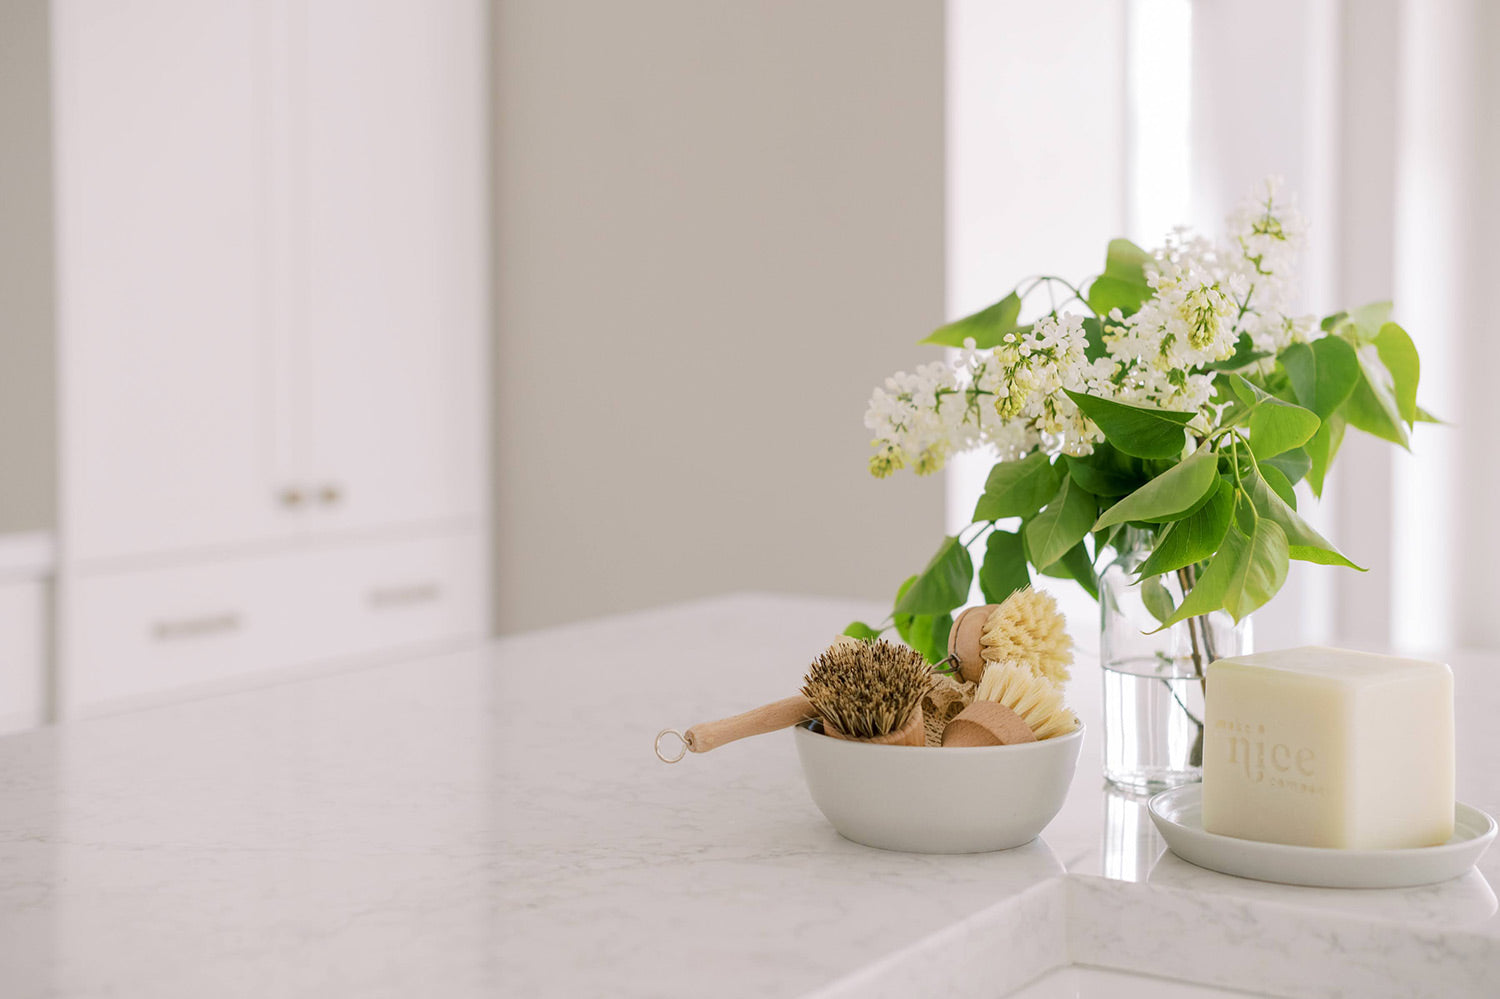 Bright neutral kitchen with sustainable dish brushes in a bowl and a large solid dish soap on the kitchen counter with lilacs in a vase behind them.